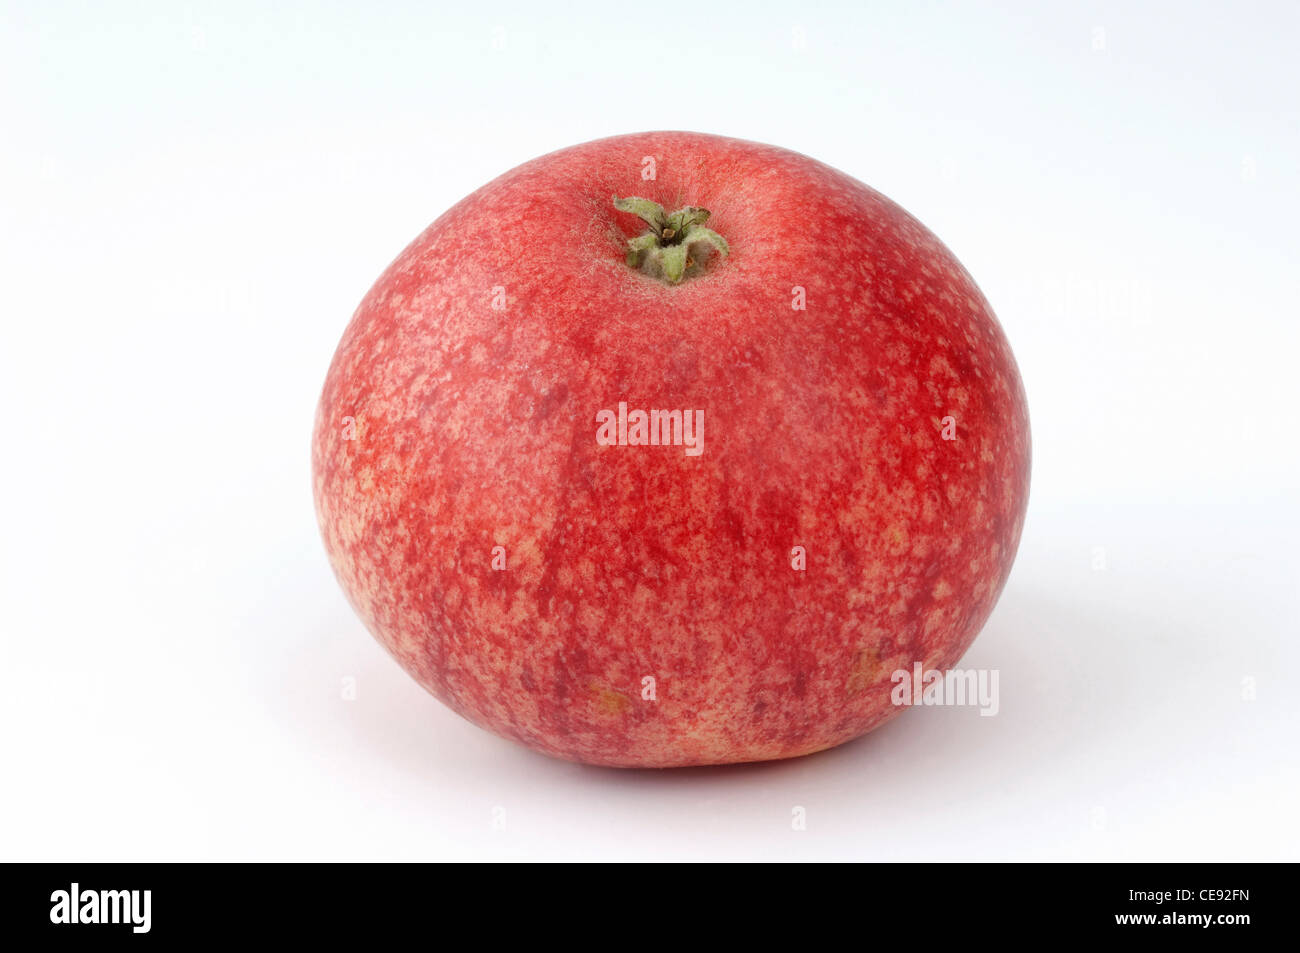 Domestic Apple (Malus domestica), variety: Beauty of Bath. Apple, studio picture against a white background. Stock Photo